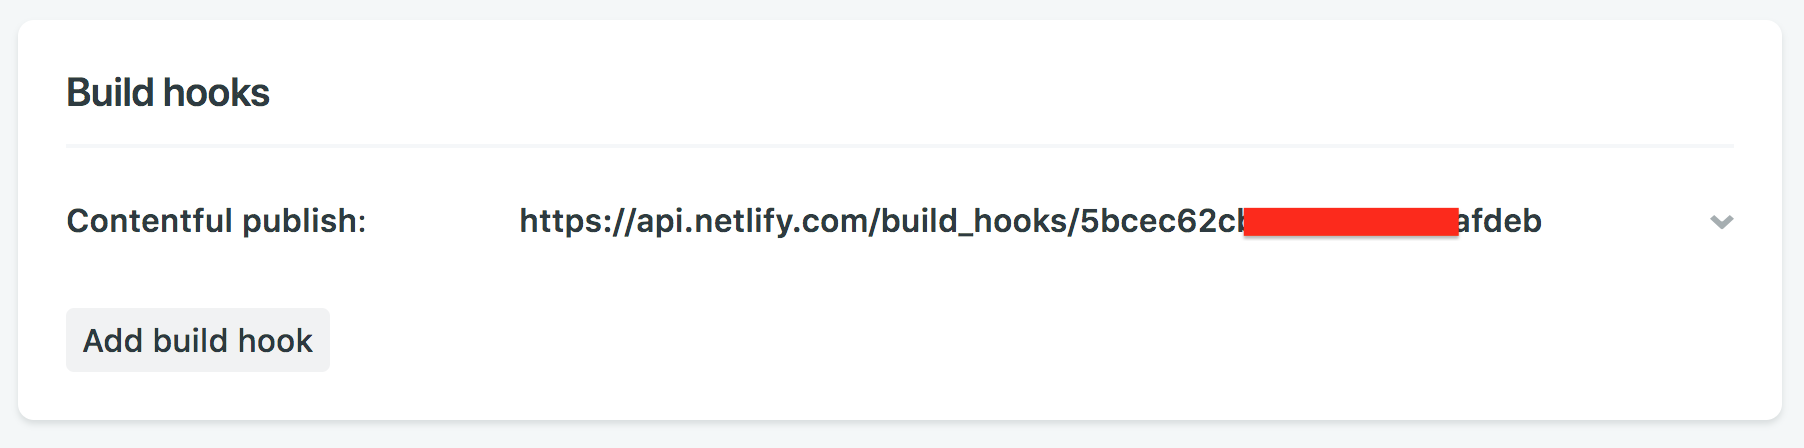 Creating a build hook on Netlify